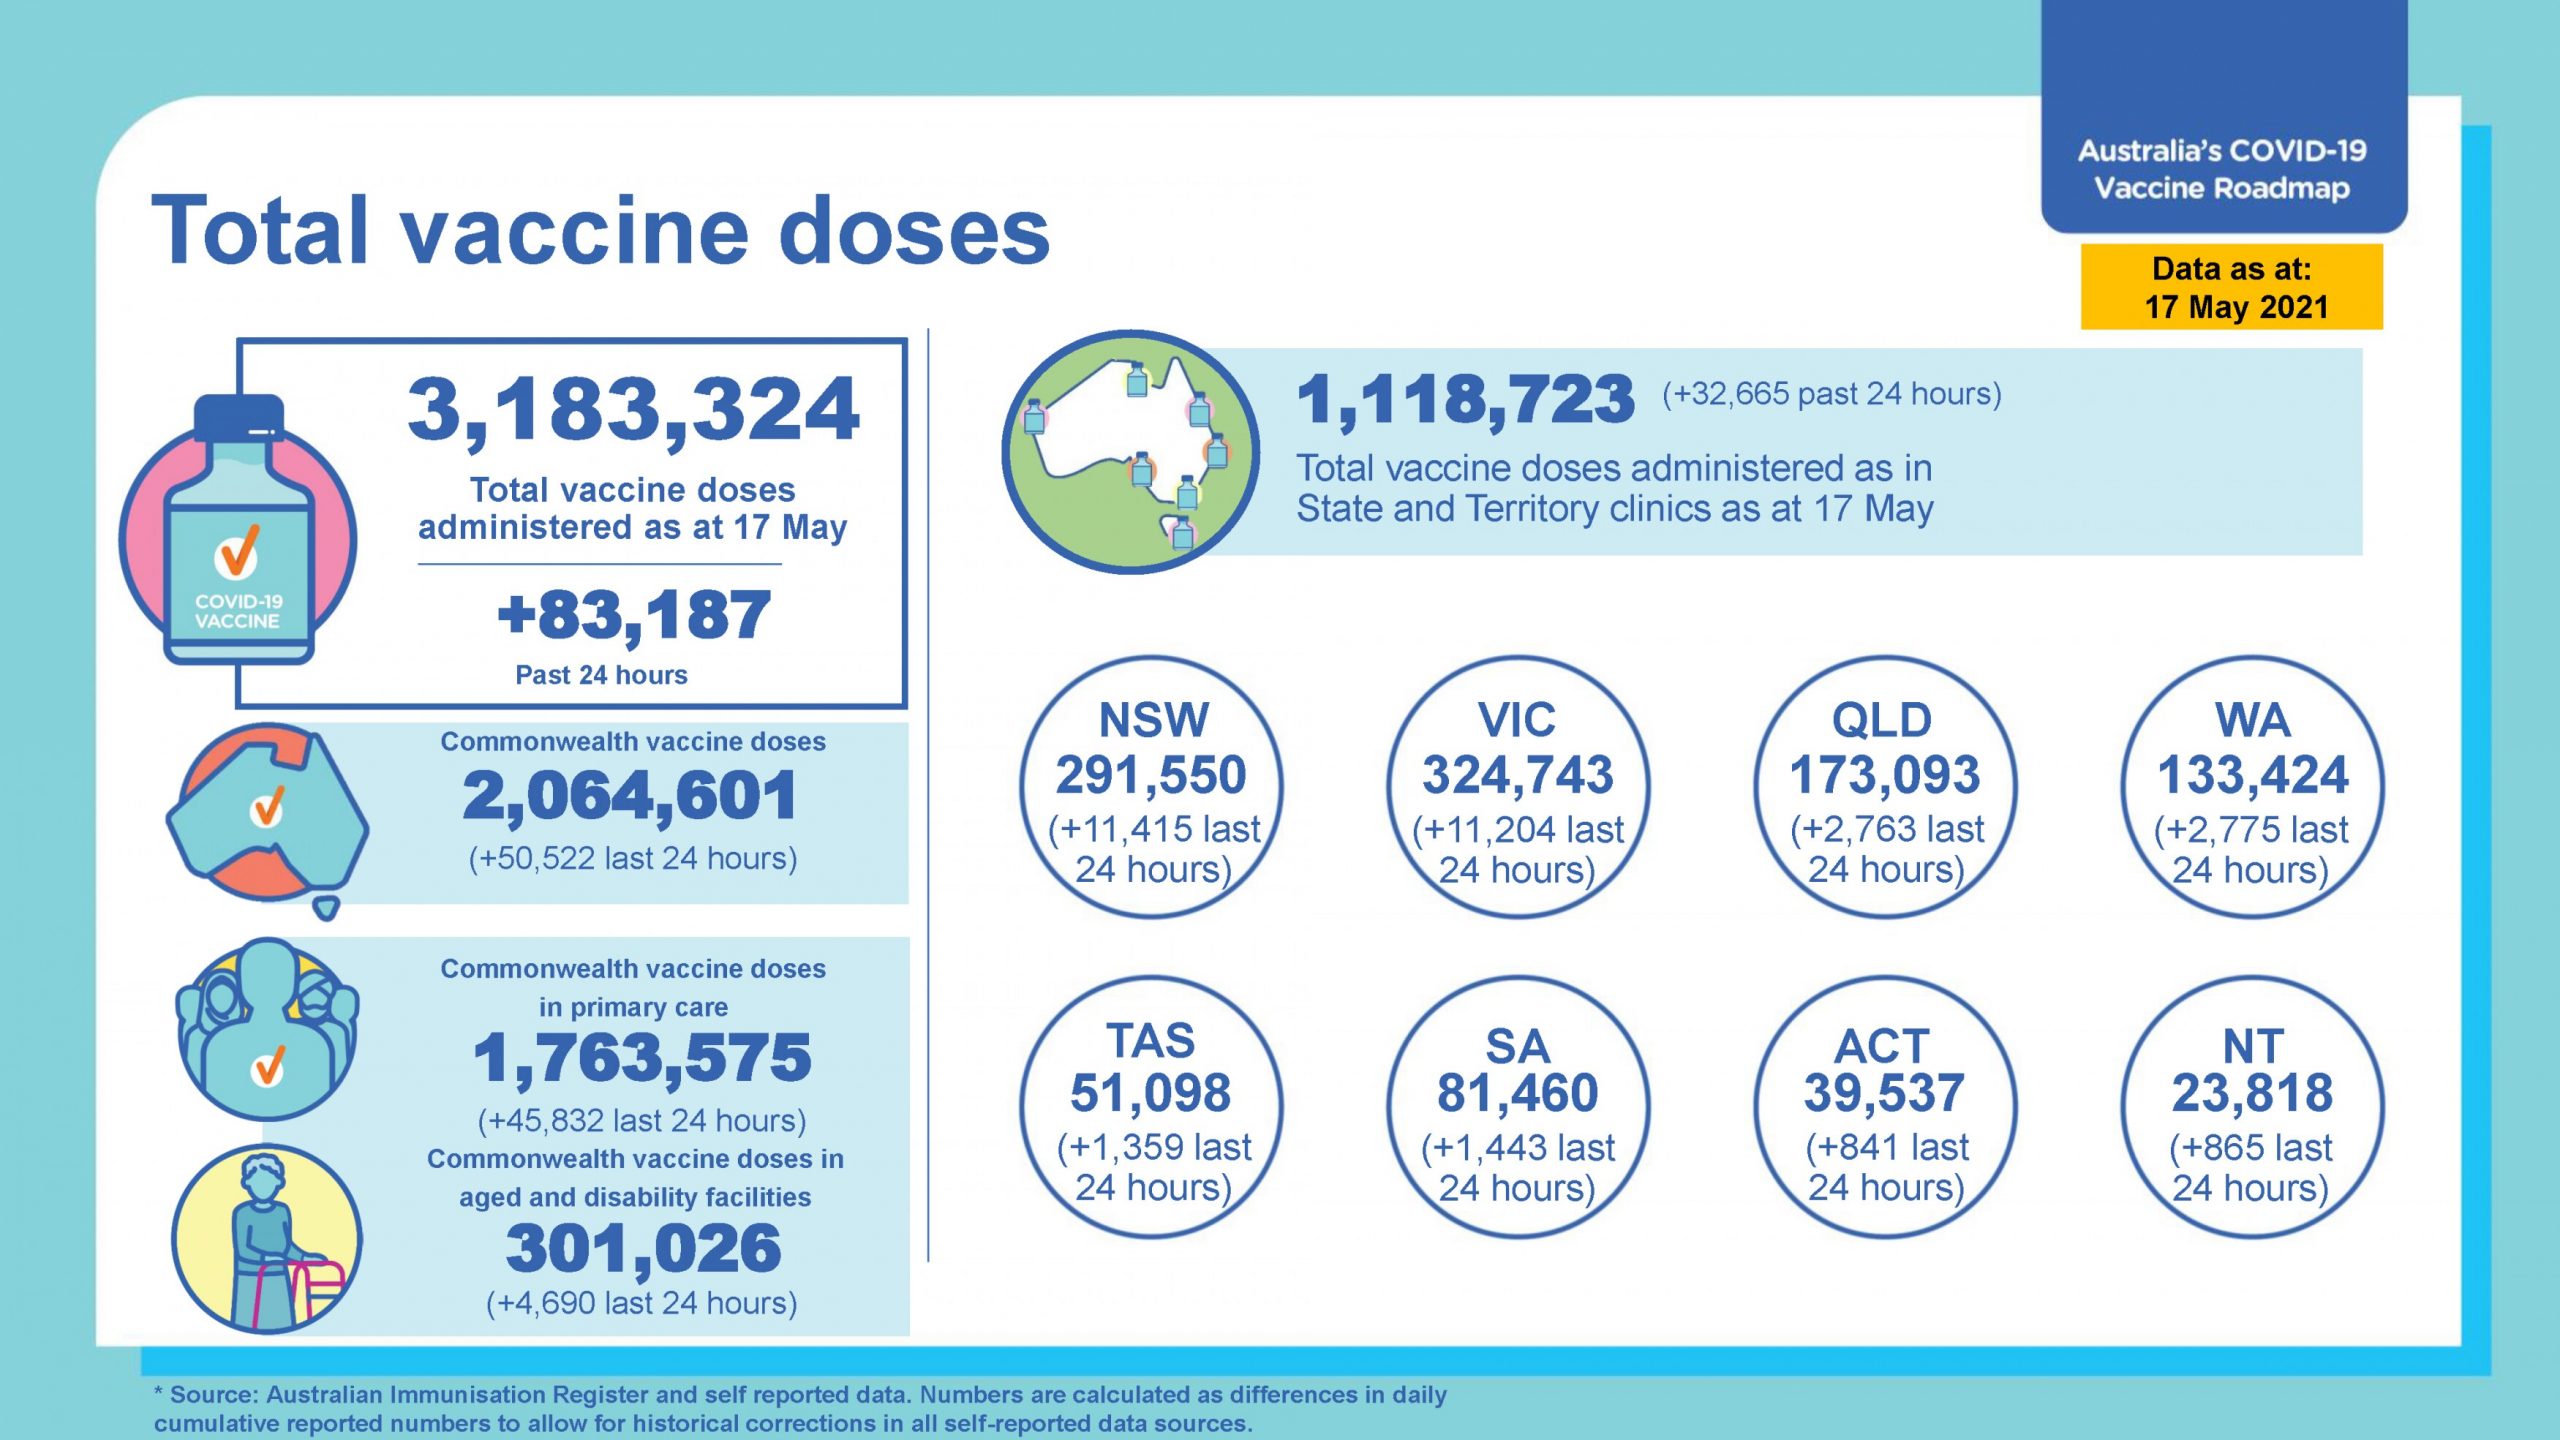 Vaccinations in Australia are now over 3 million